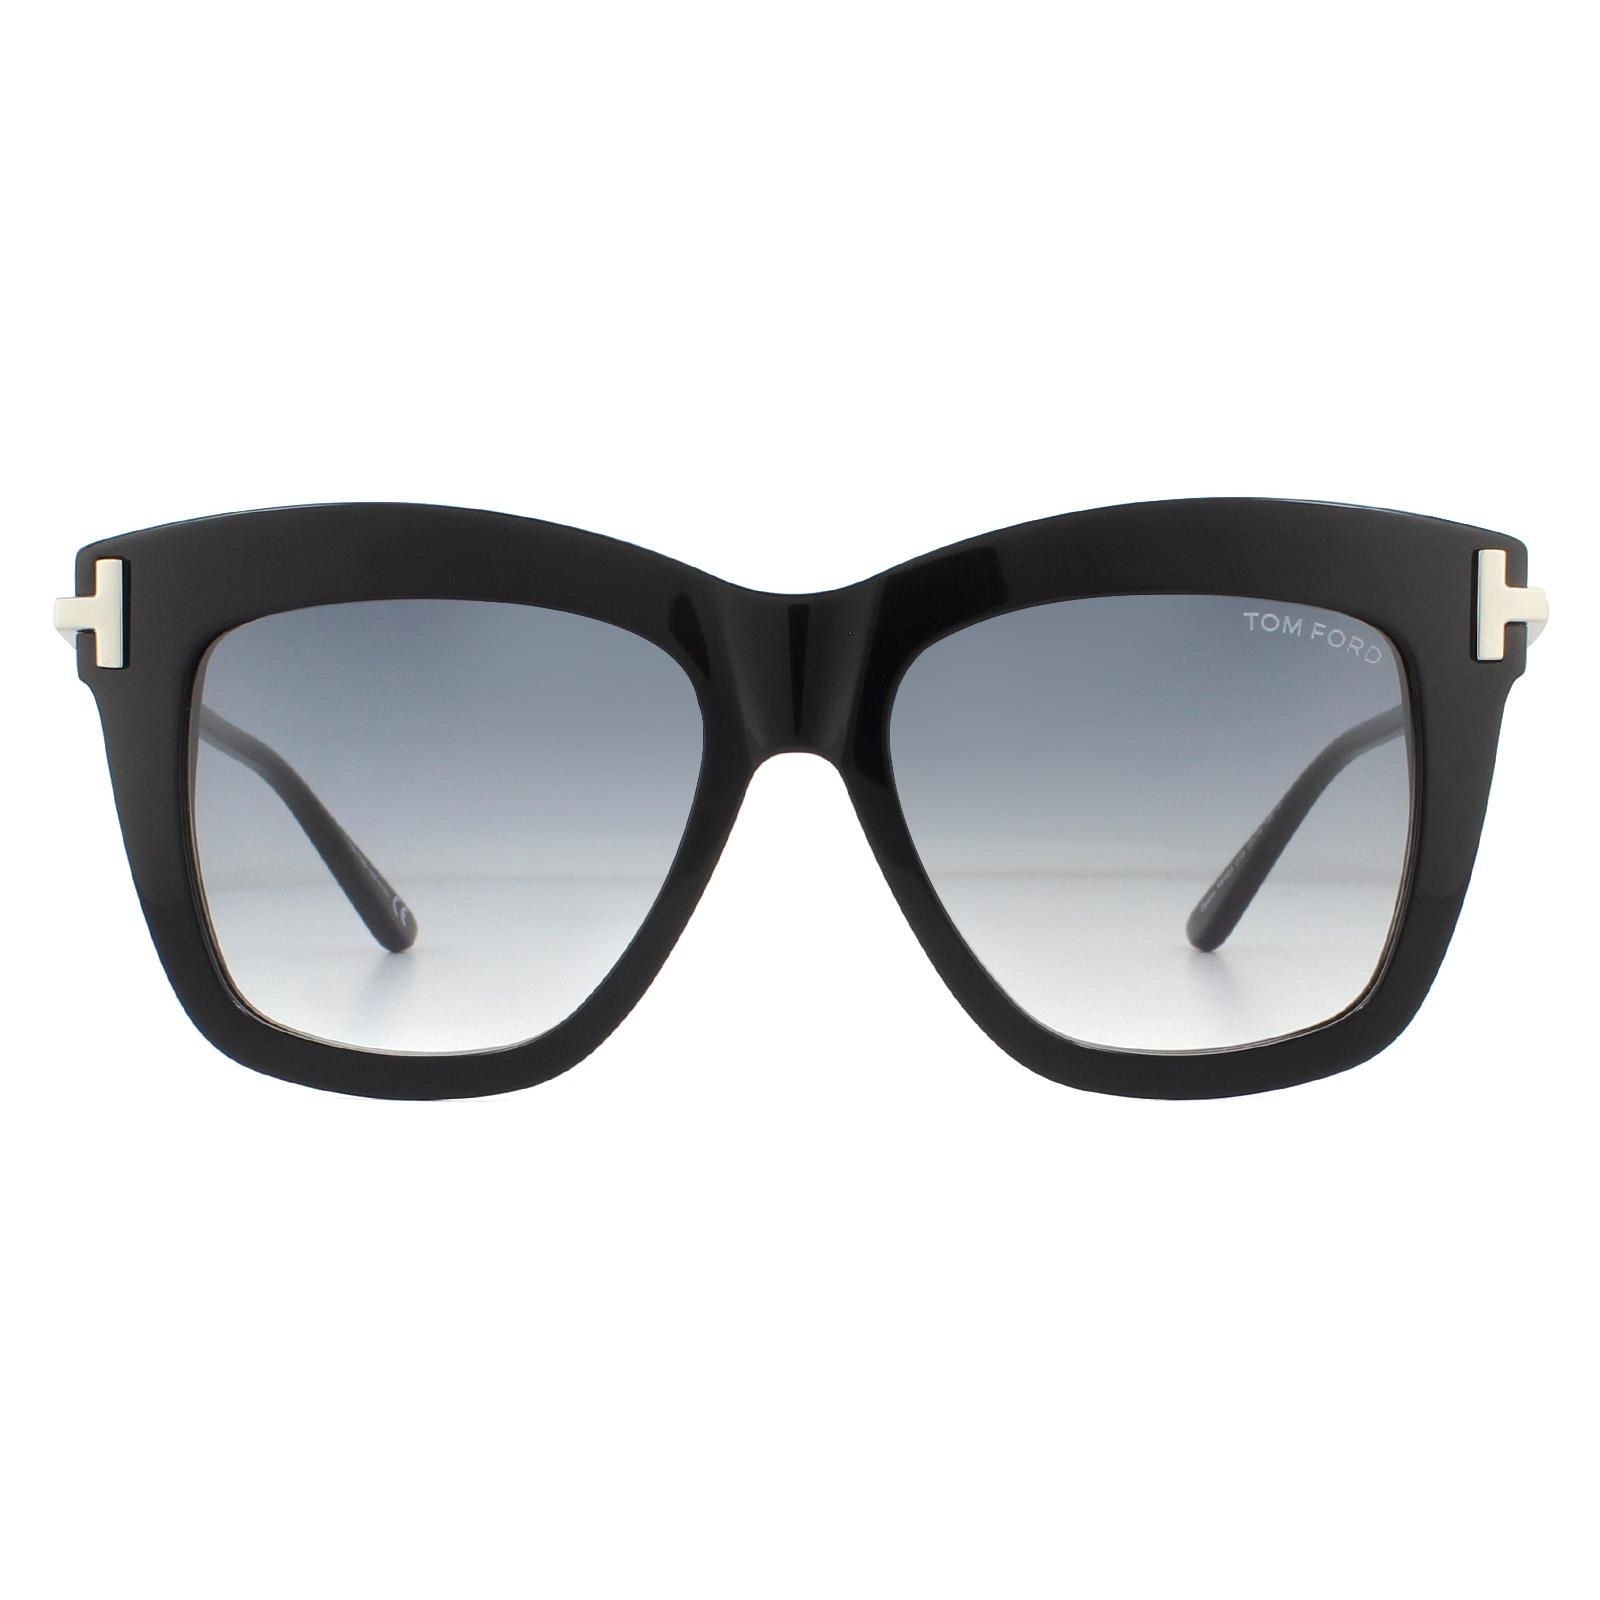 Tom Ford Sunglasses Dasha FT0822 01B Shiny Black Smoke Gradient are soft squared acetate style sunglasses characterised by the large T temple decoration.